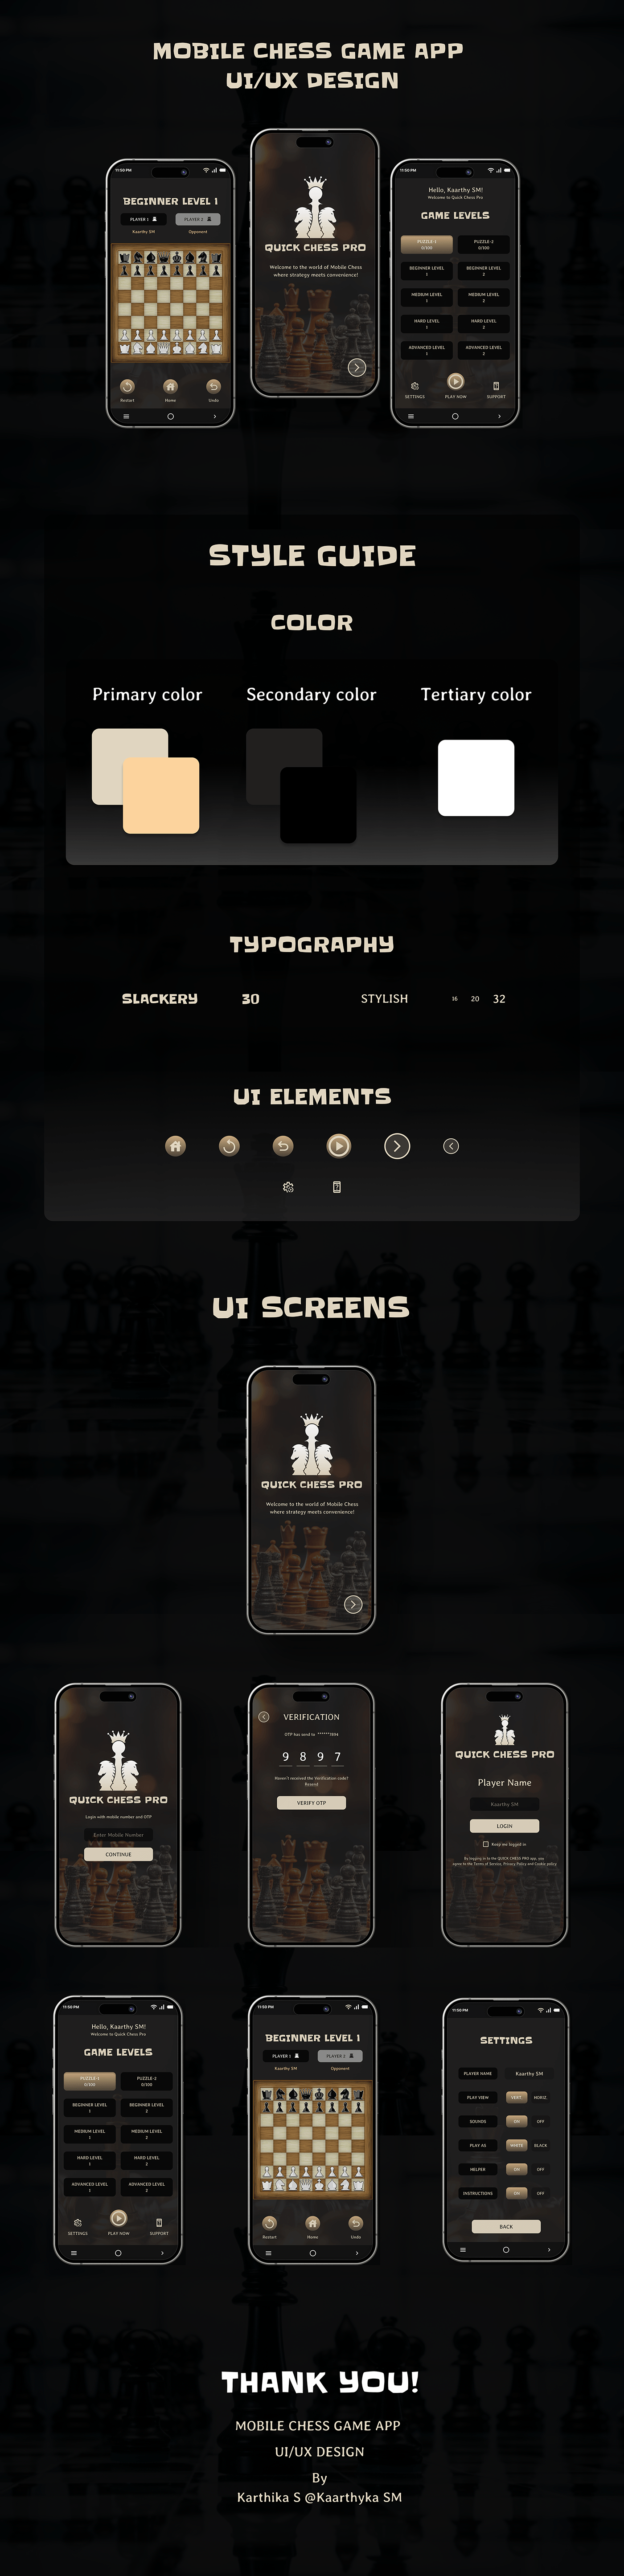 chess game ui user interface user experience app design Games UI Attractive ui/ux Chess game UI/UX Kaarthyka SM Mobile chess UI UI/UX